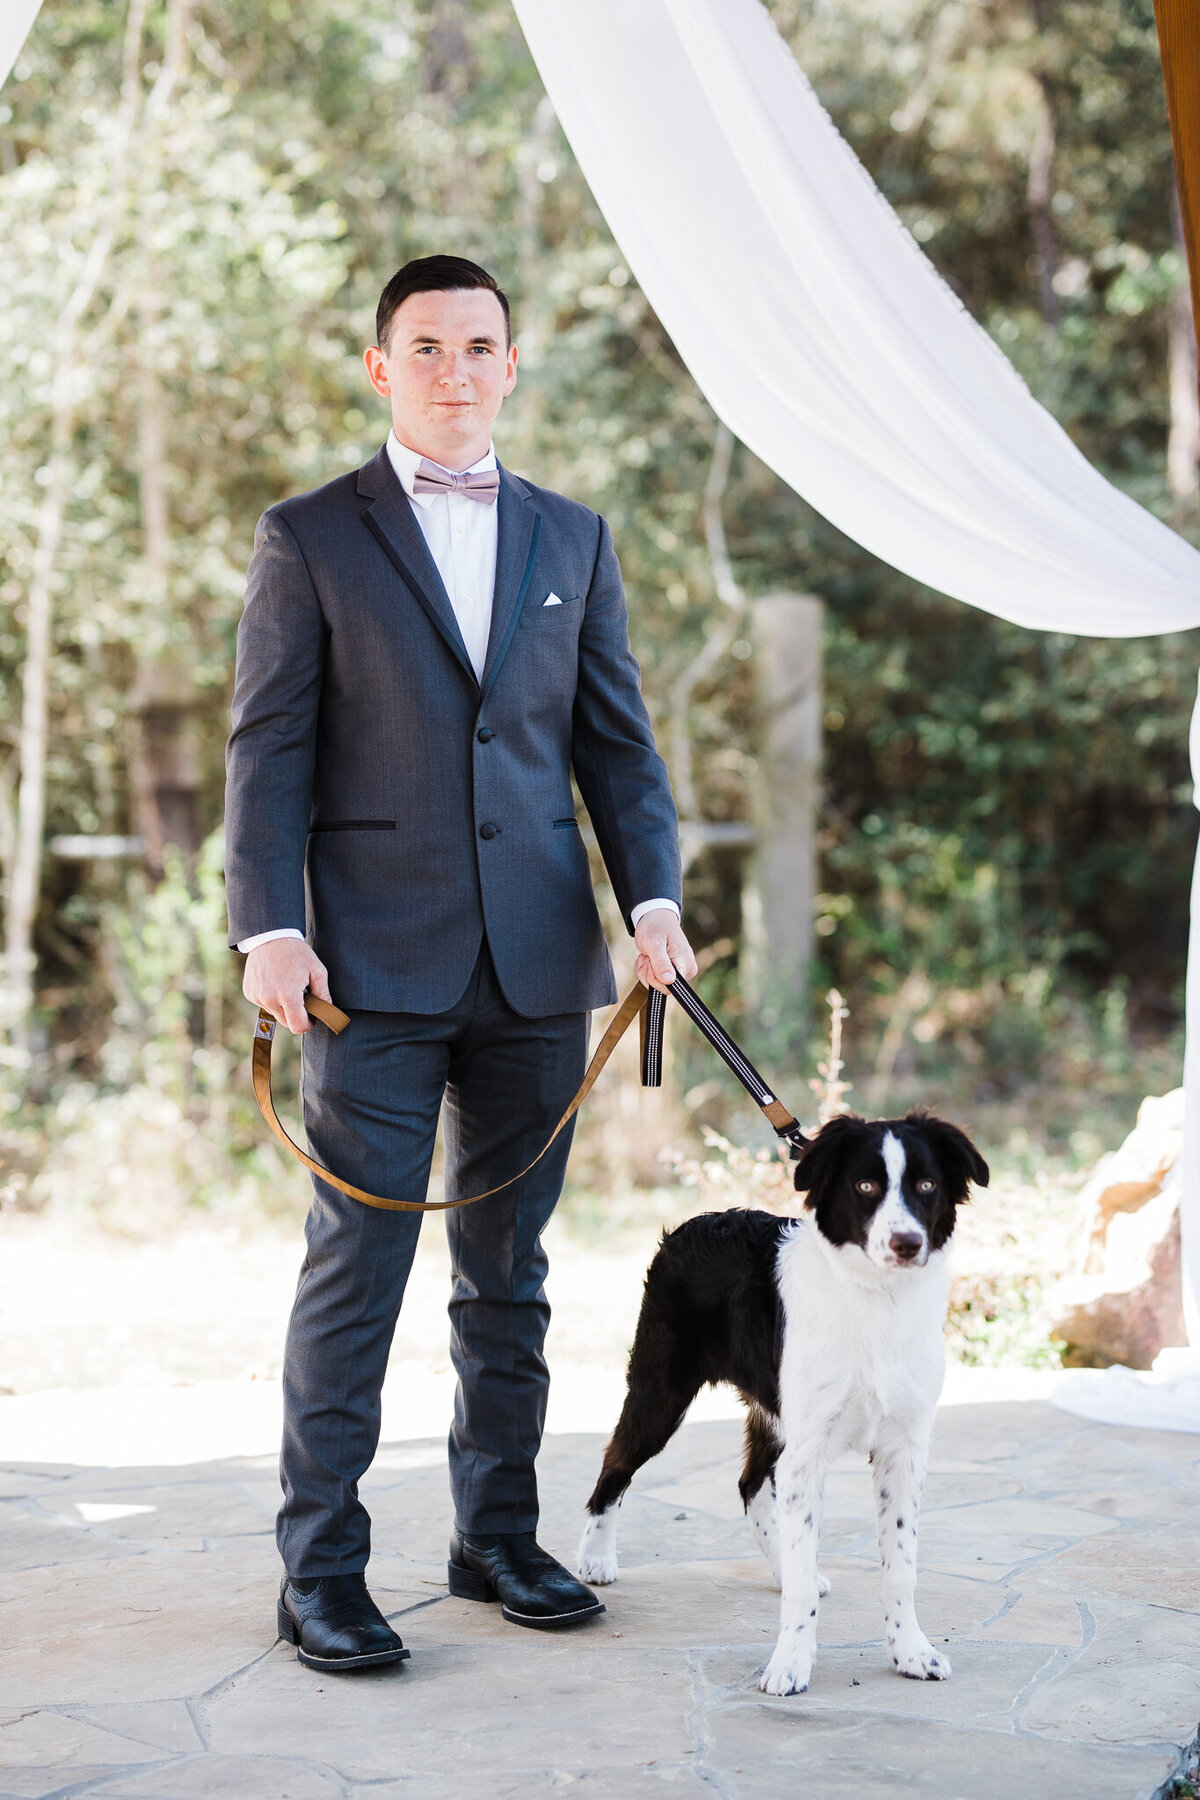 Groom with Pup at Wedding Venue